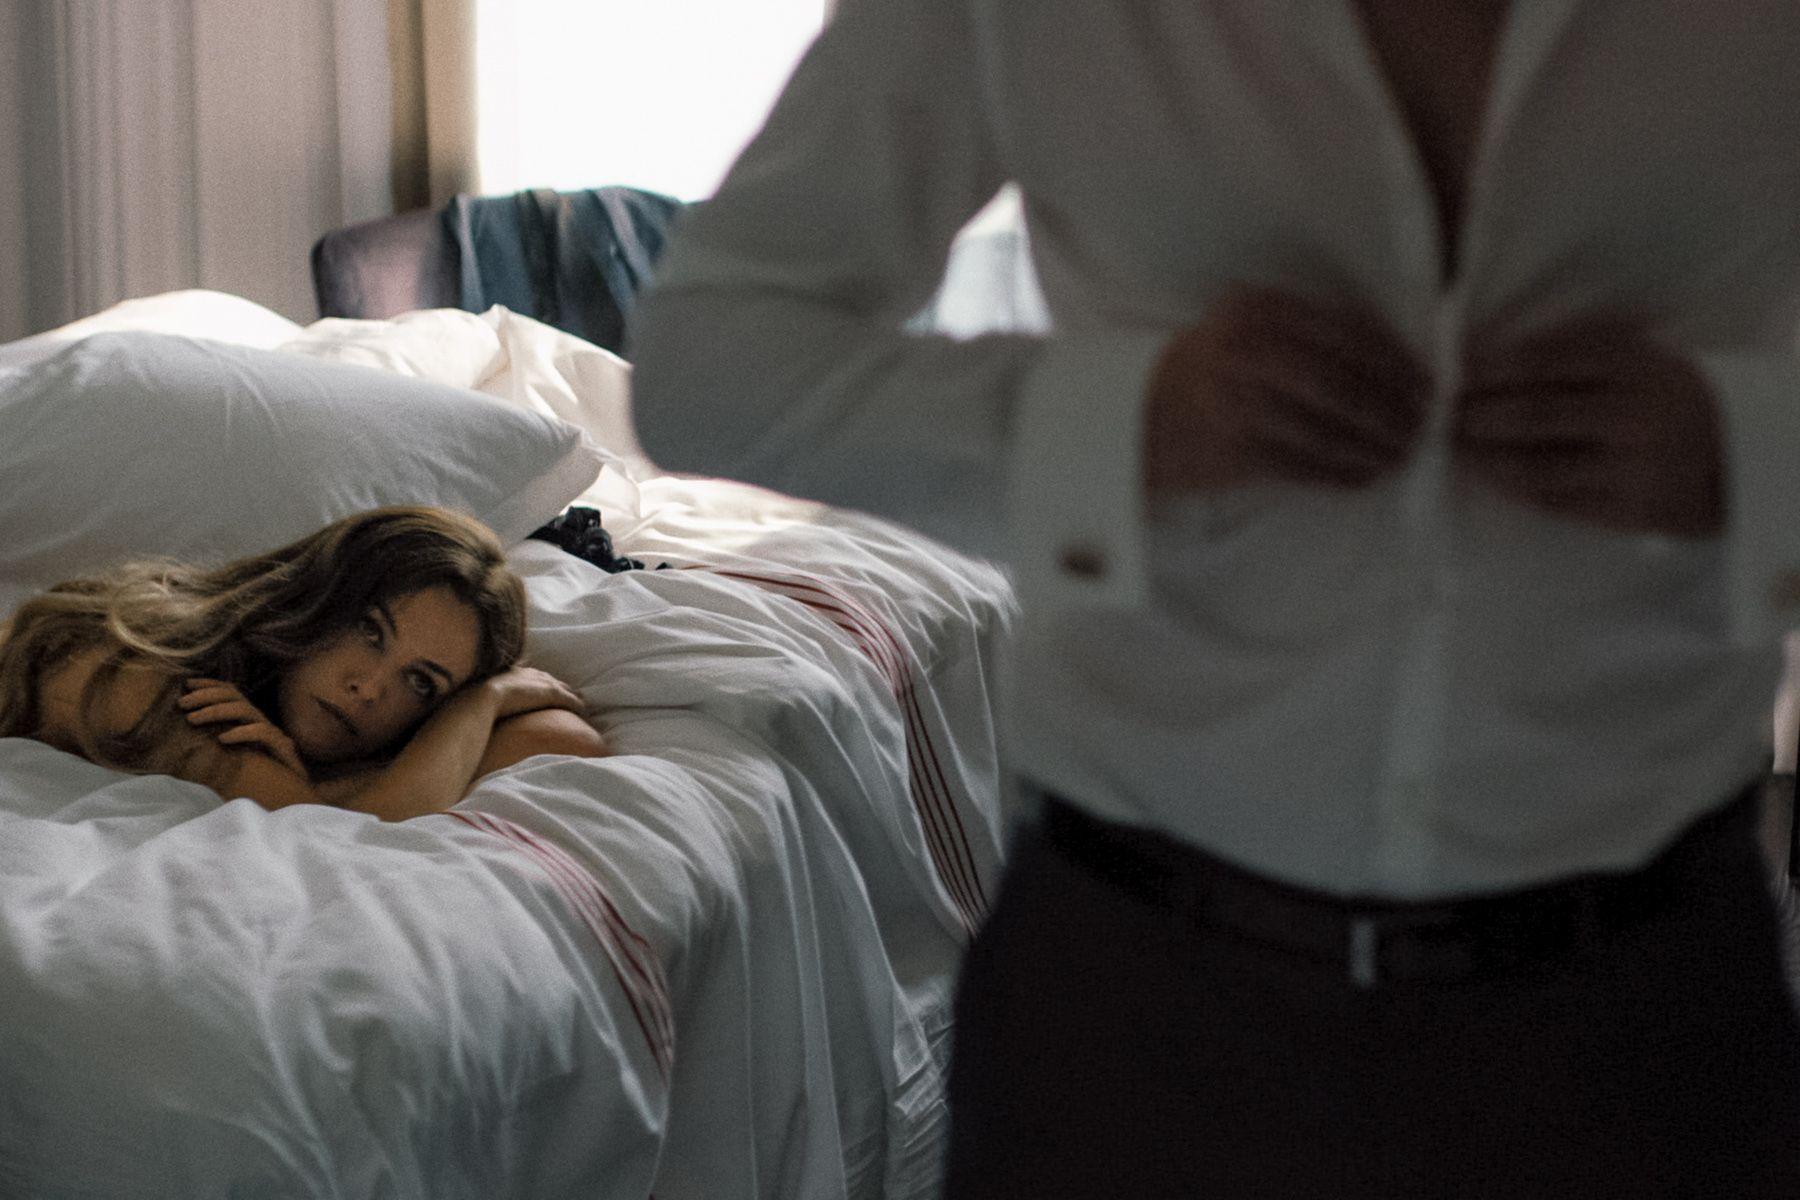 The Girlfriend Experience Wallpapers